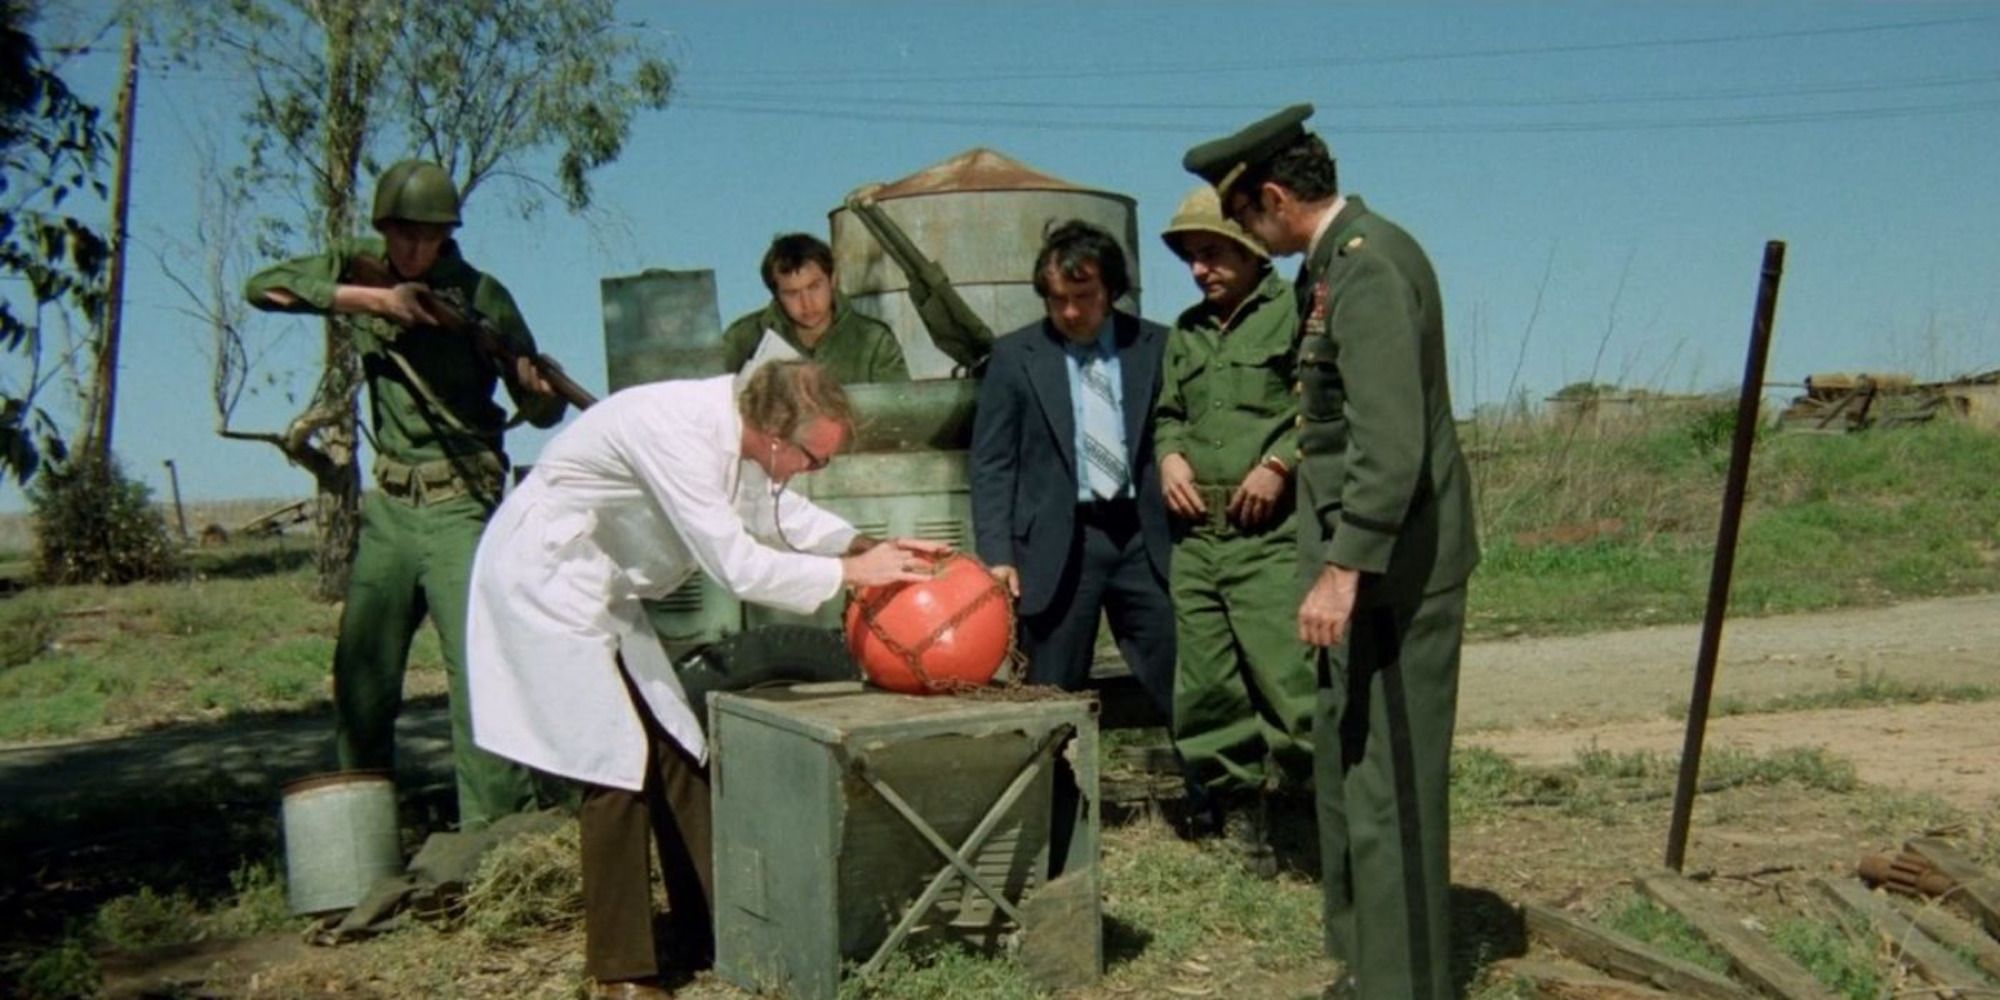 Characters in a scene from Attack Of The Killer Tomatoes